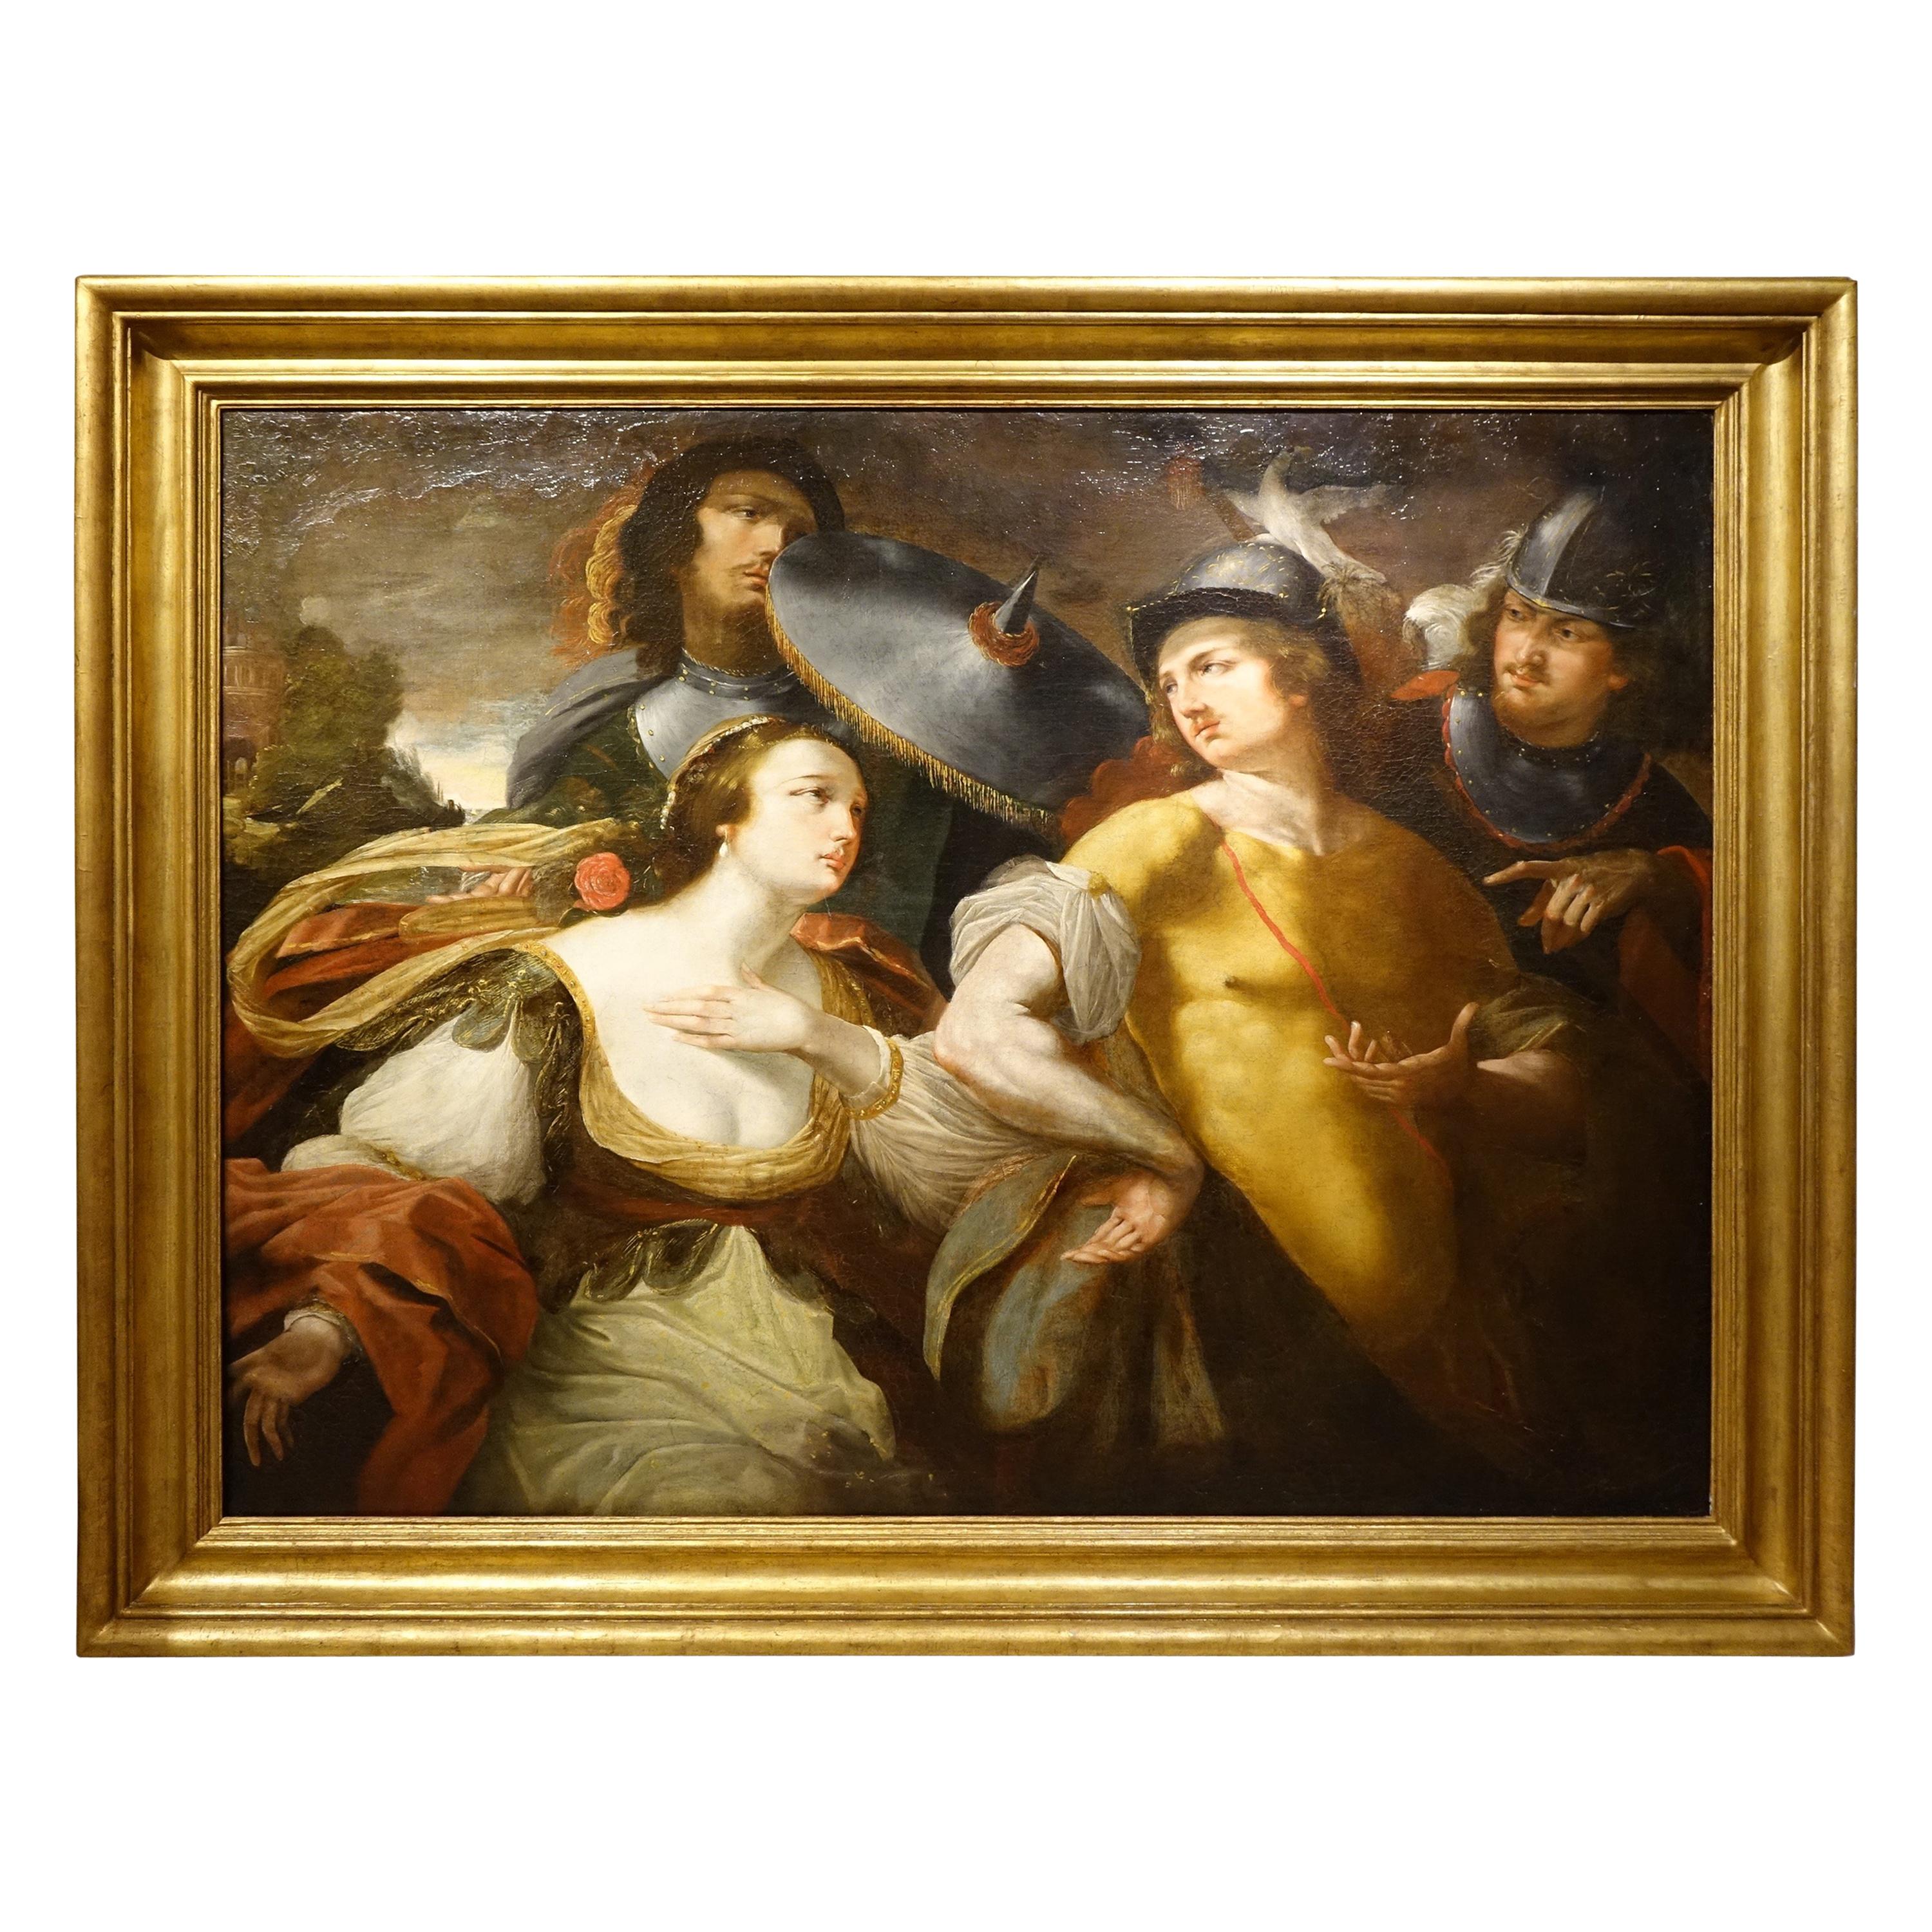 Painting Representing "Alexander the Great and Timoclea", France, 17th Century